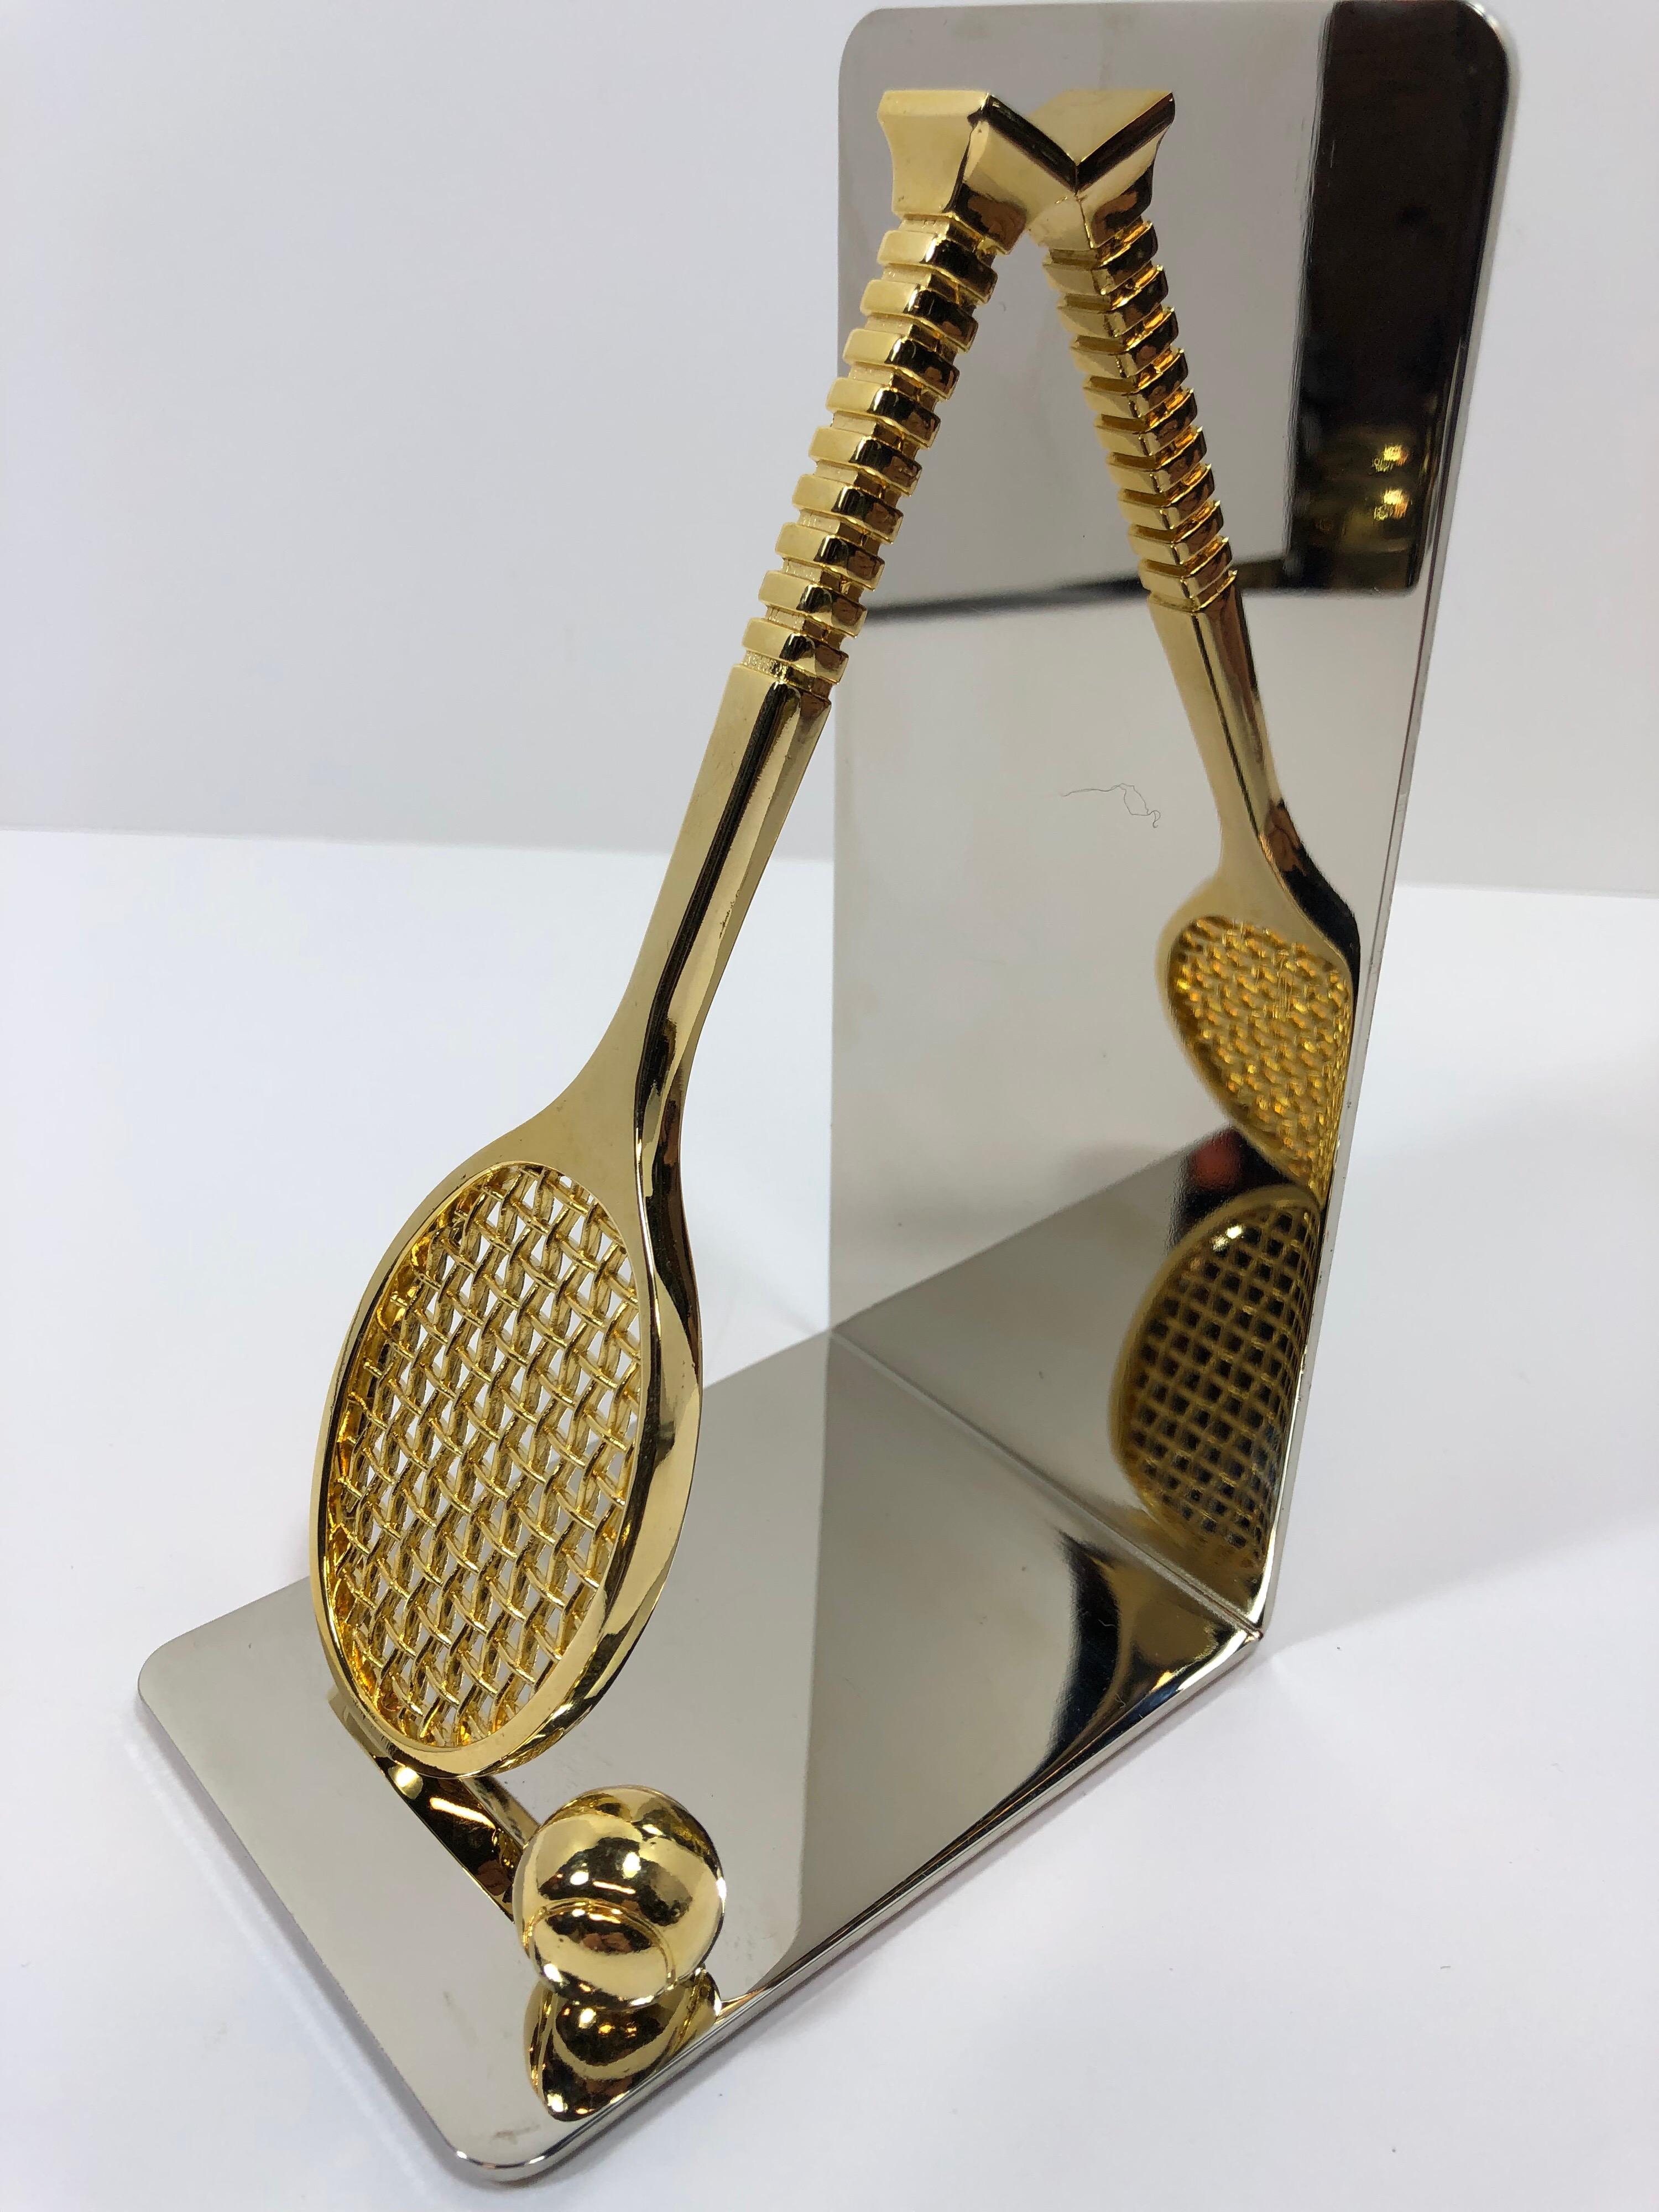 Modern Set of Polished Brass and Chrome Tennis Racket Bookends